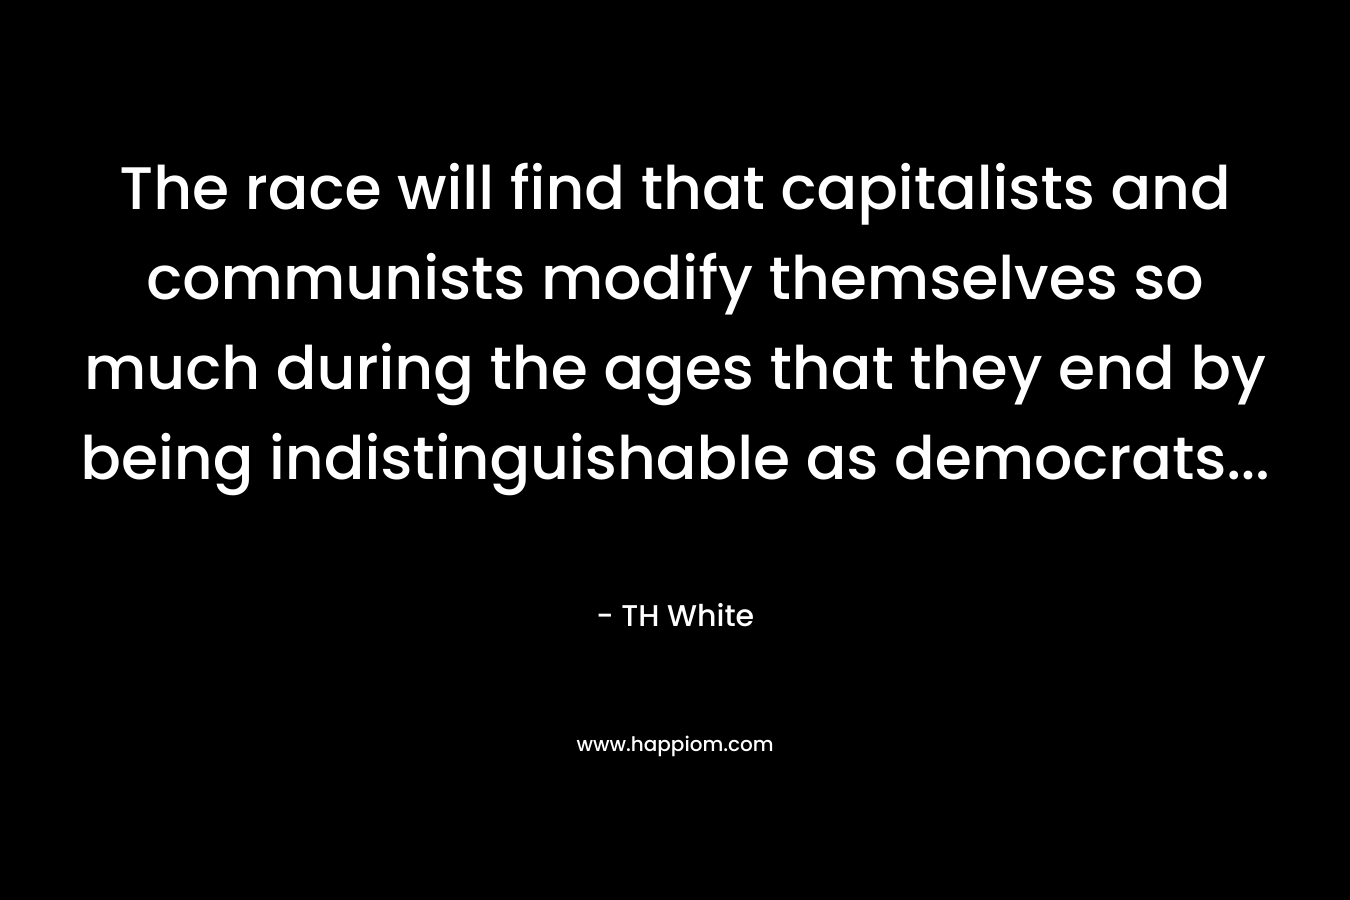 The race will find that capitalists and communists modify themselves so much during the ages that they end by being indistinguishable as democrats… – TH White